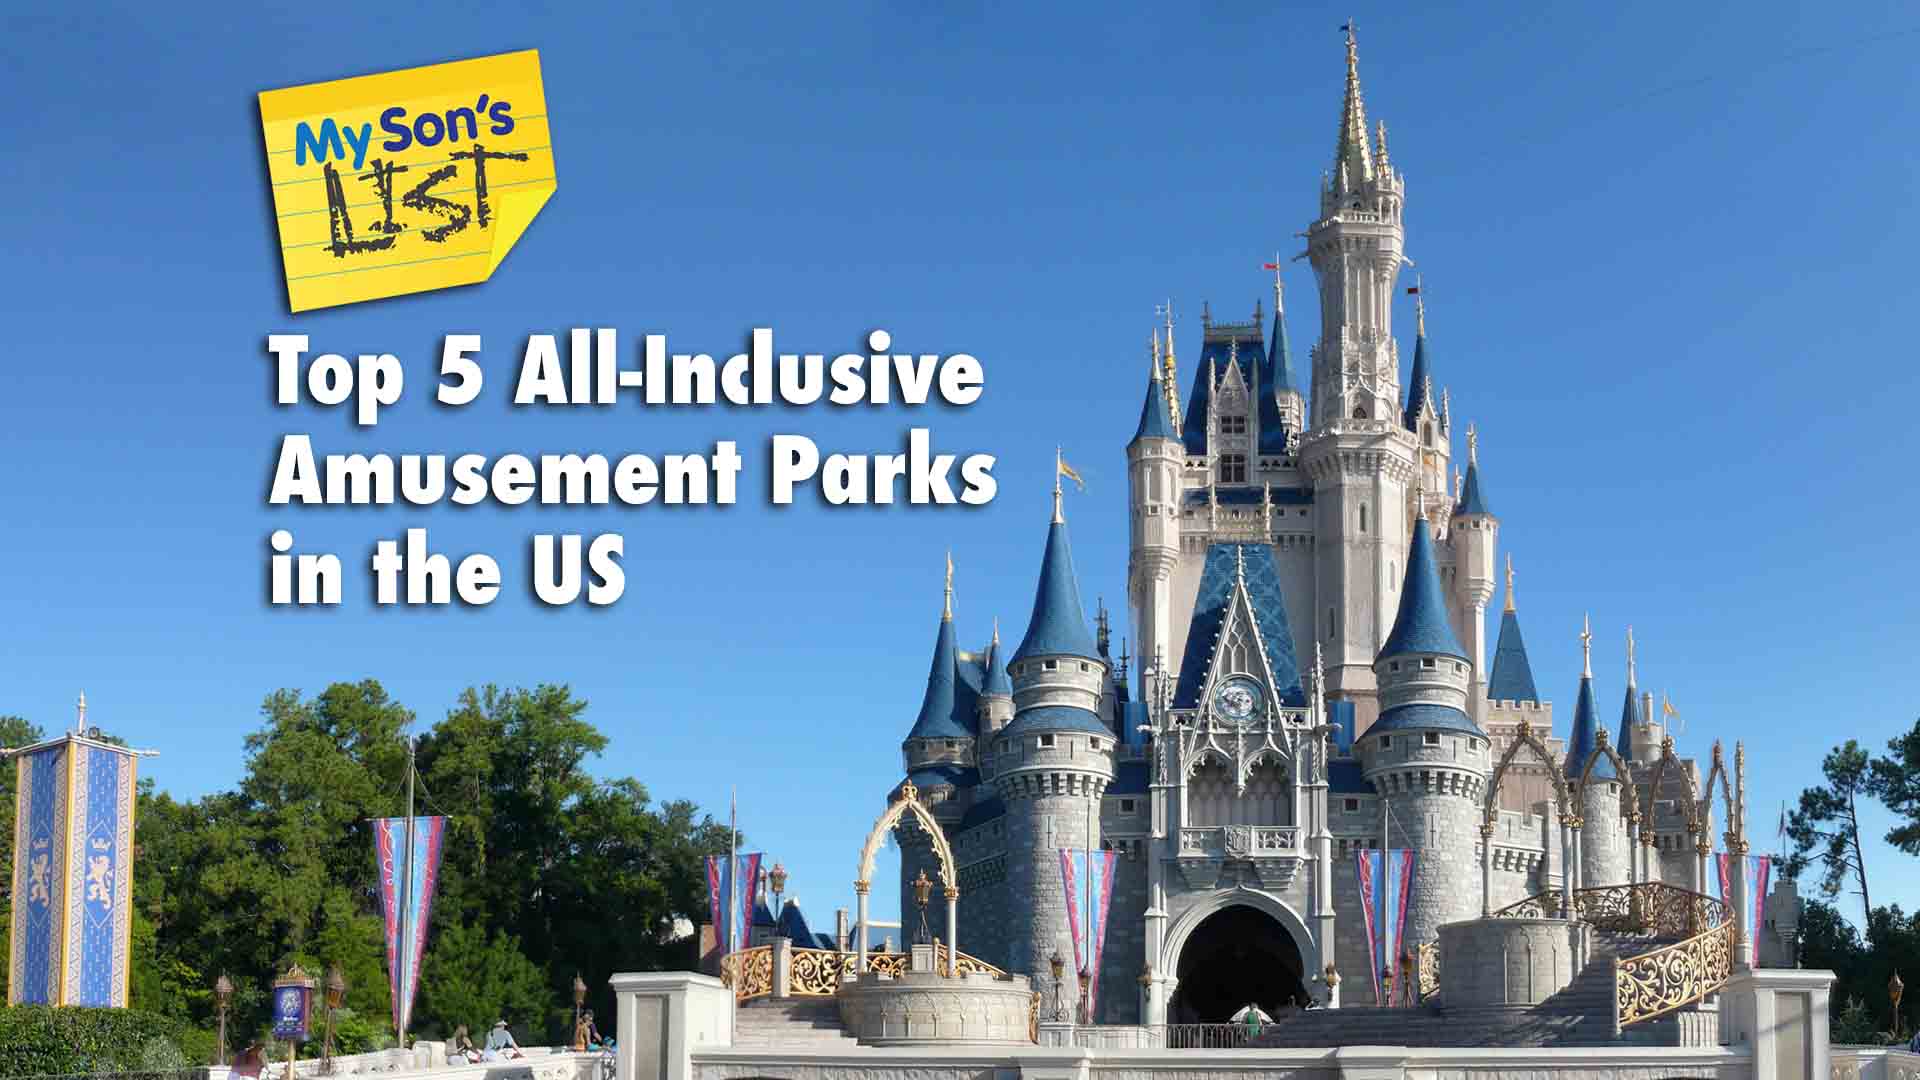 My Sons List of Top 5 All-Inclusive Amusement Parks in the US